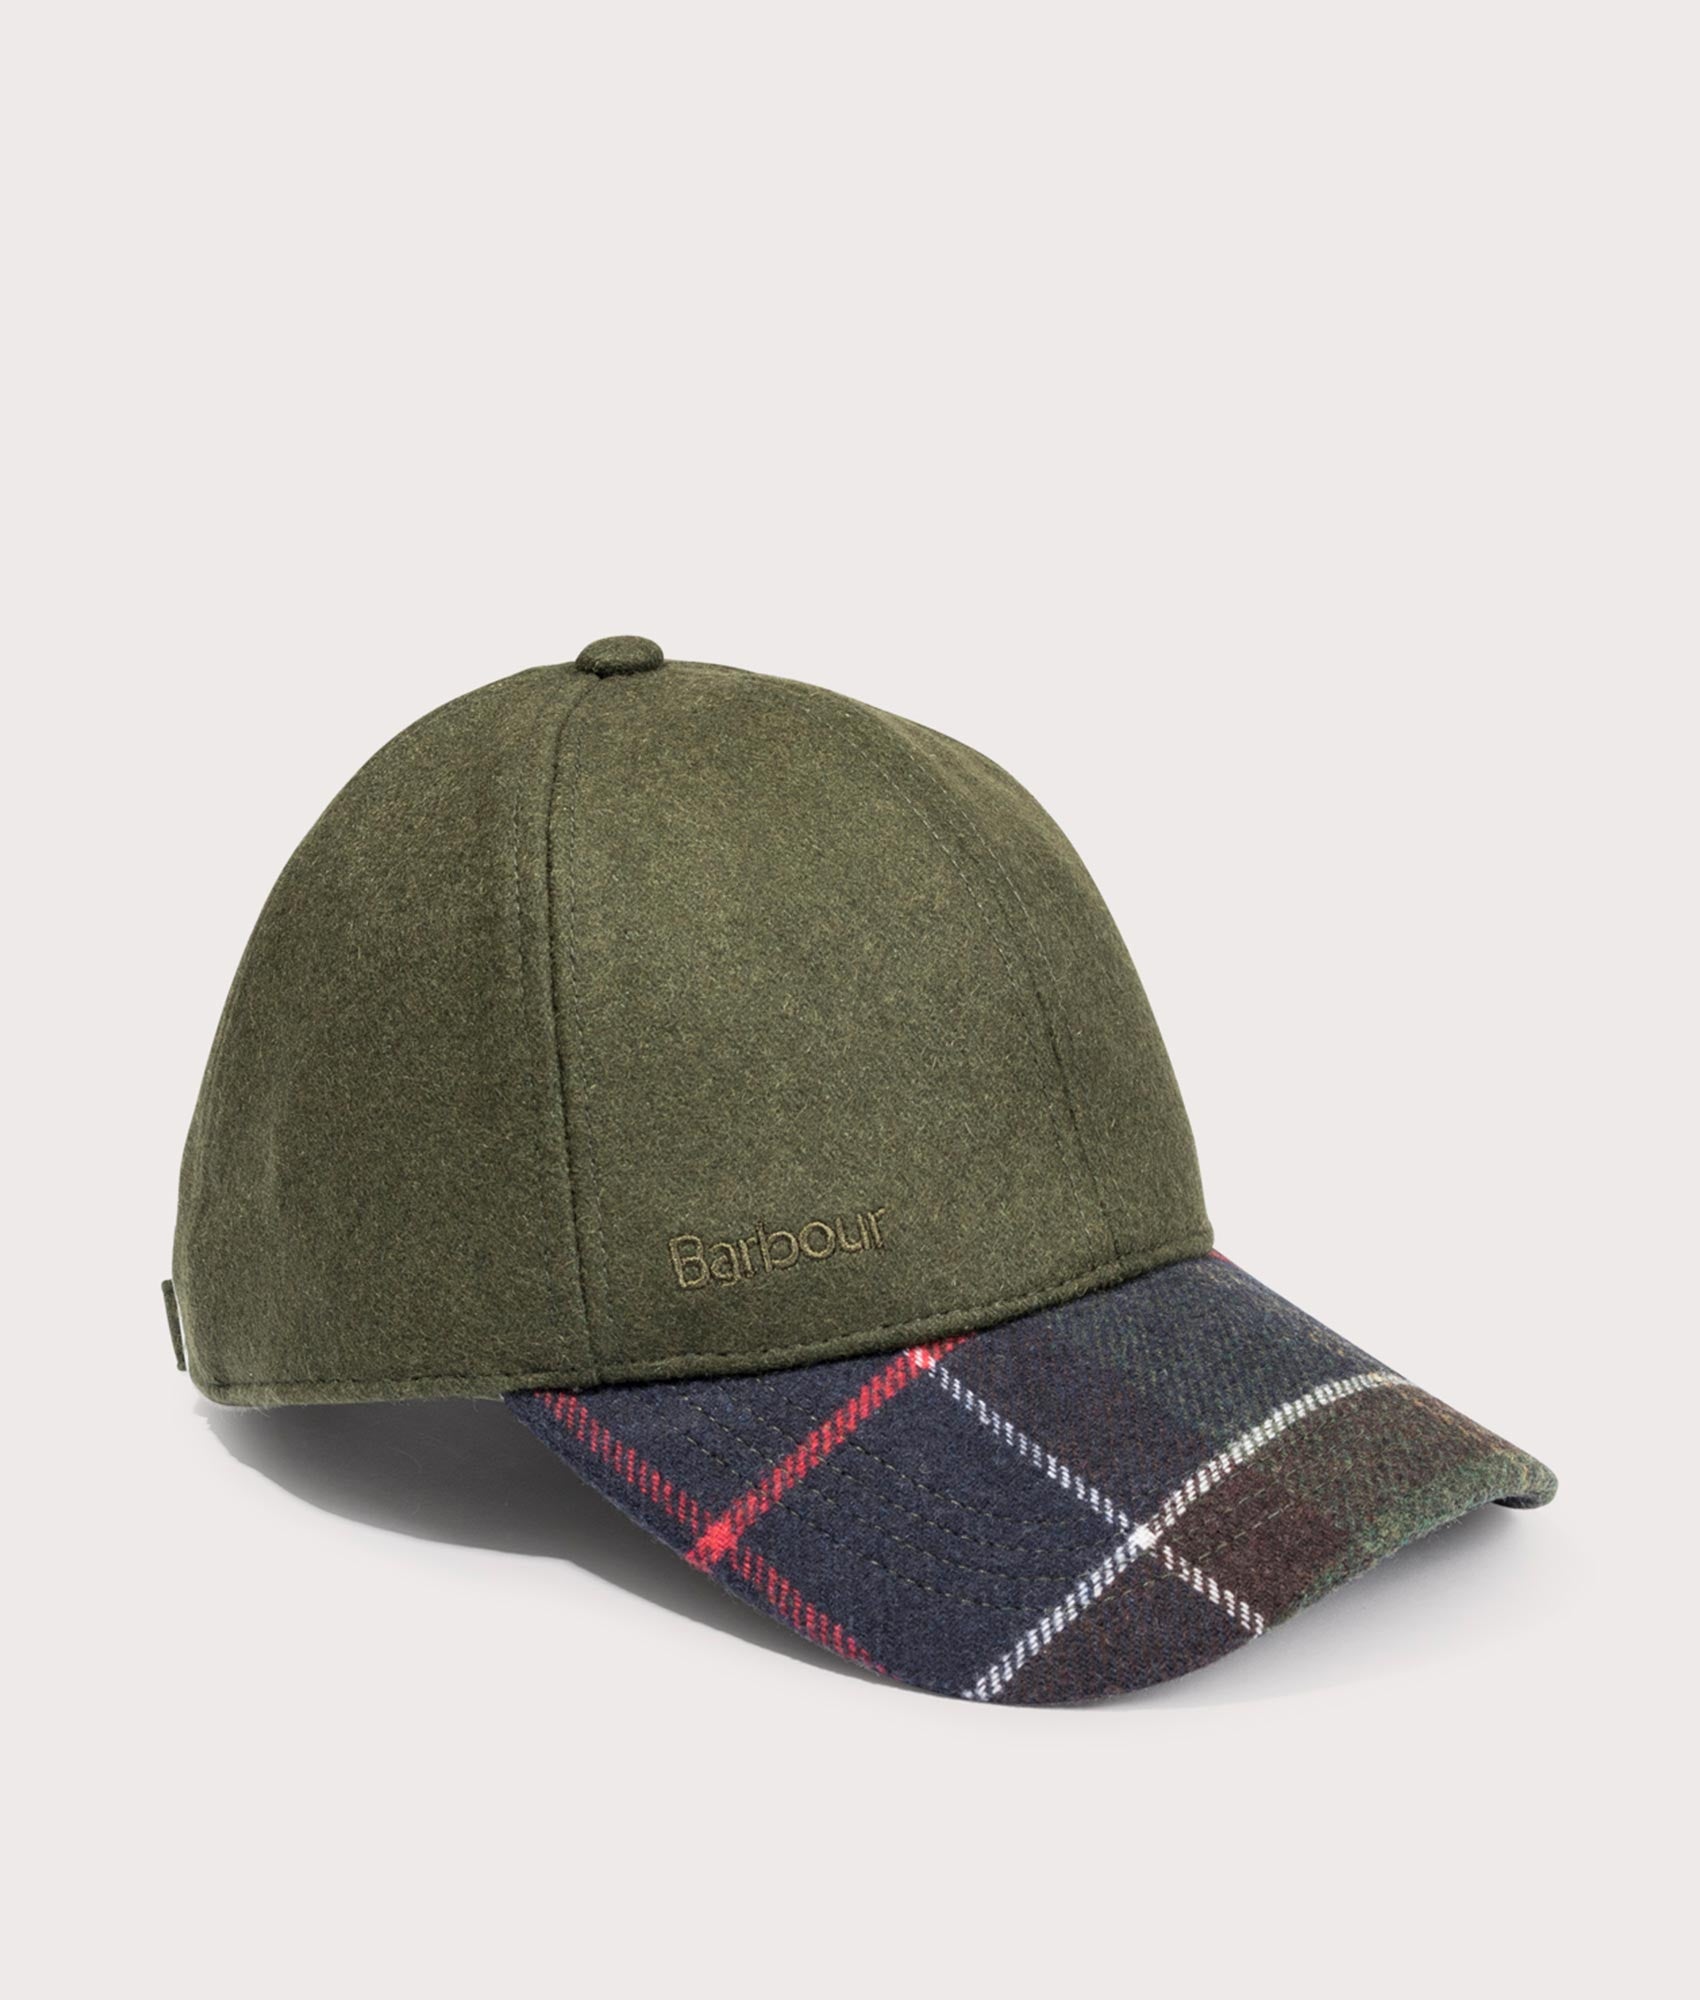 Barbour Lifestyle Mens Roker Sports Woven Cap - Colour: GN55 Forest Green/Classic - Size: One Size